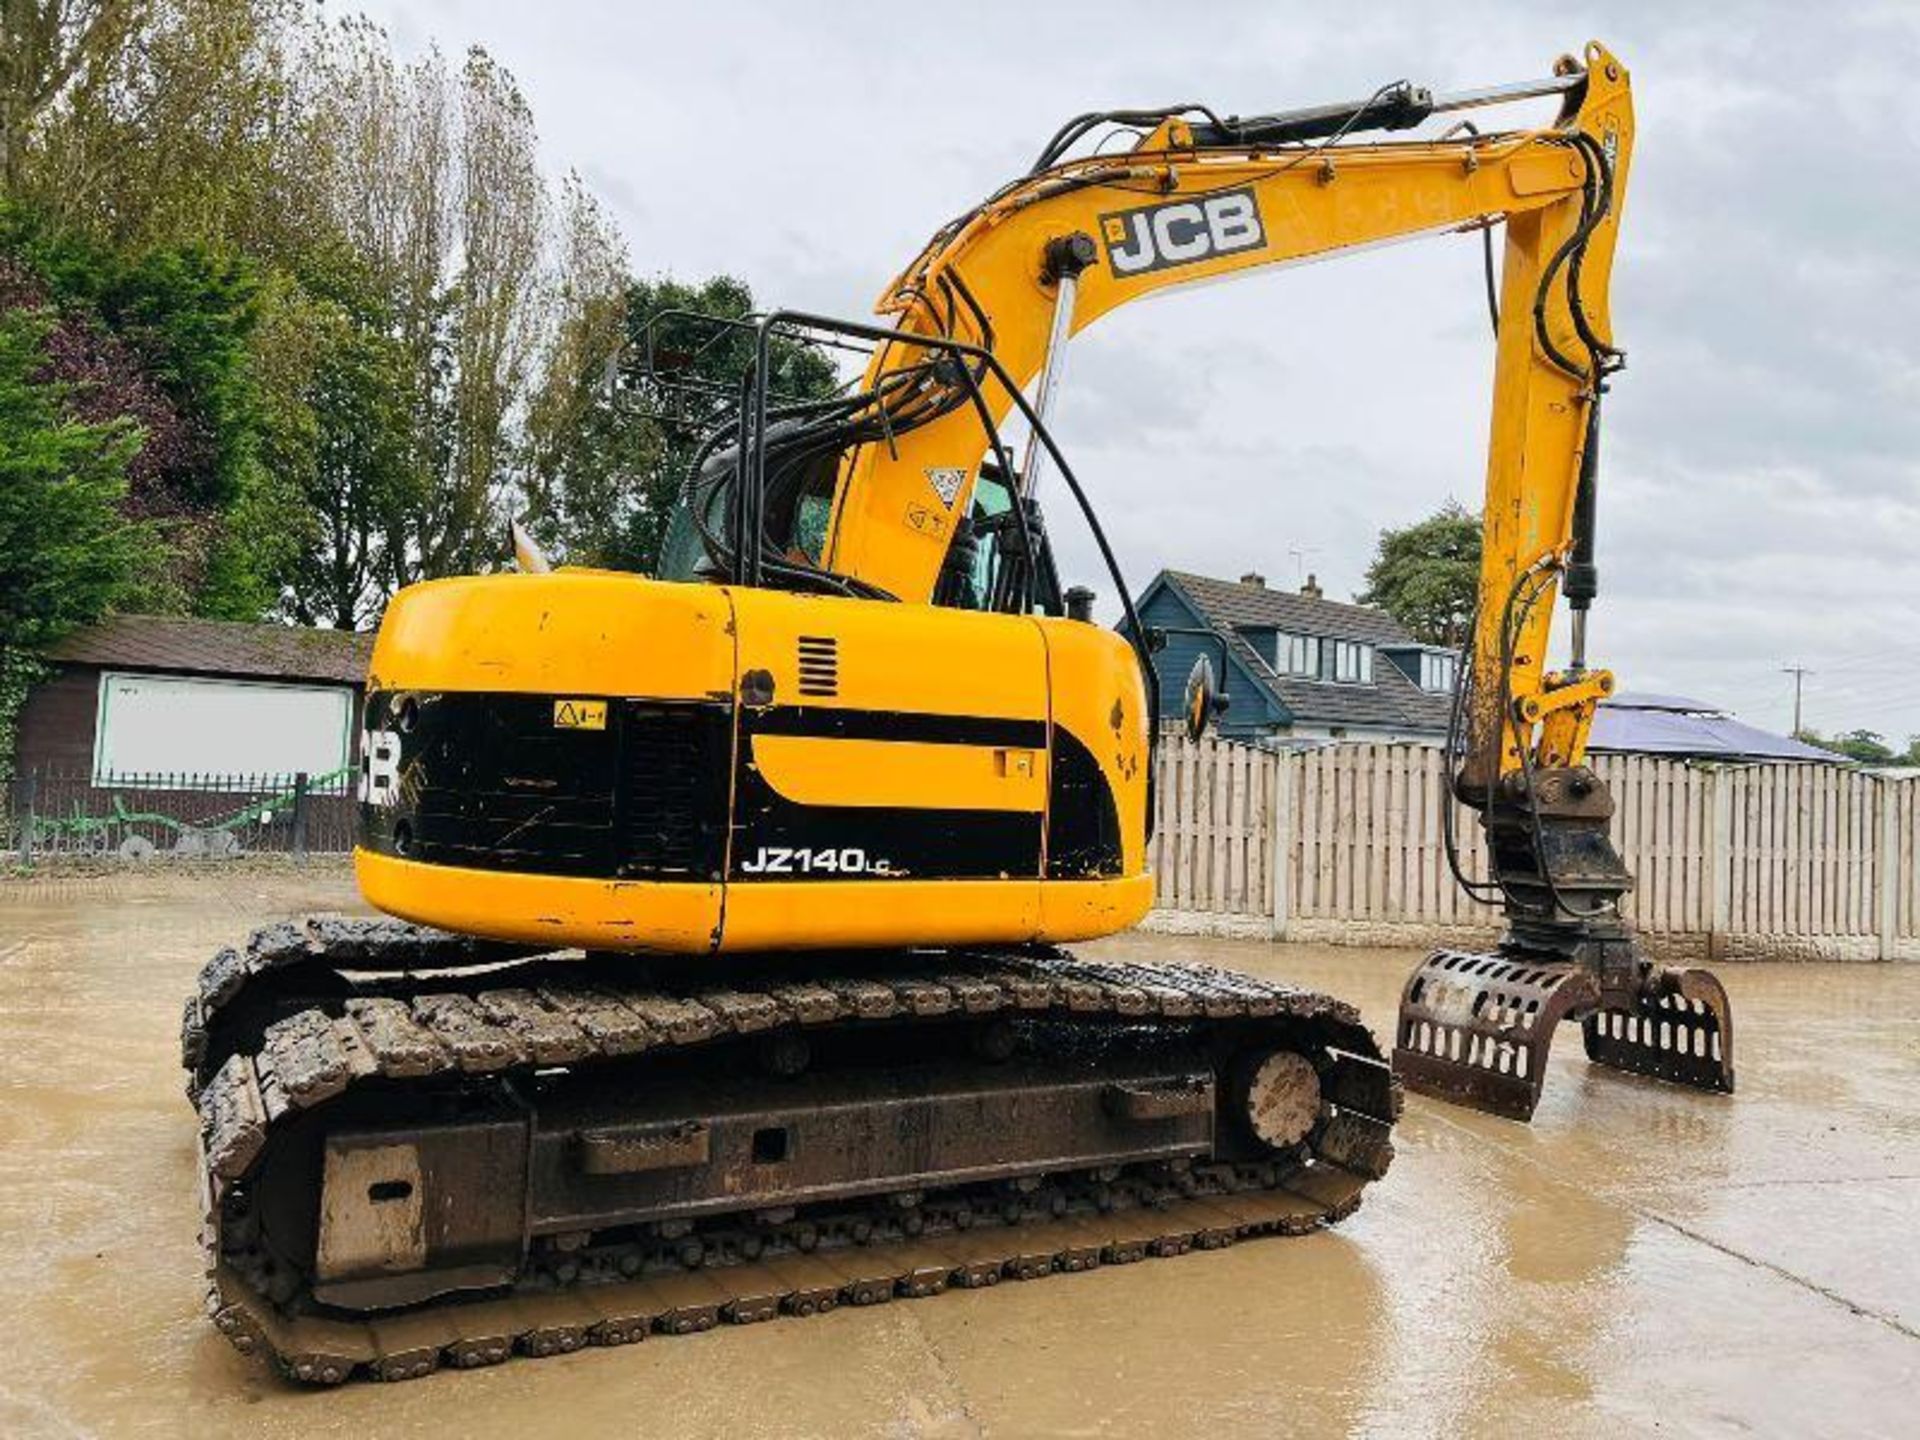 JCB JZ140 TRACKED EXCAVATOR *ZERO SWING* C/W QUICK HITCH & ROTATING SELECTOR GRAB. - Image 3 of 15